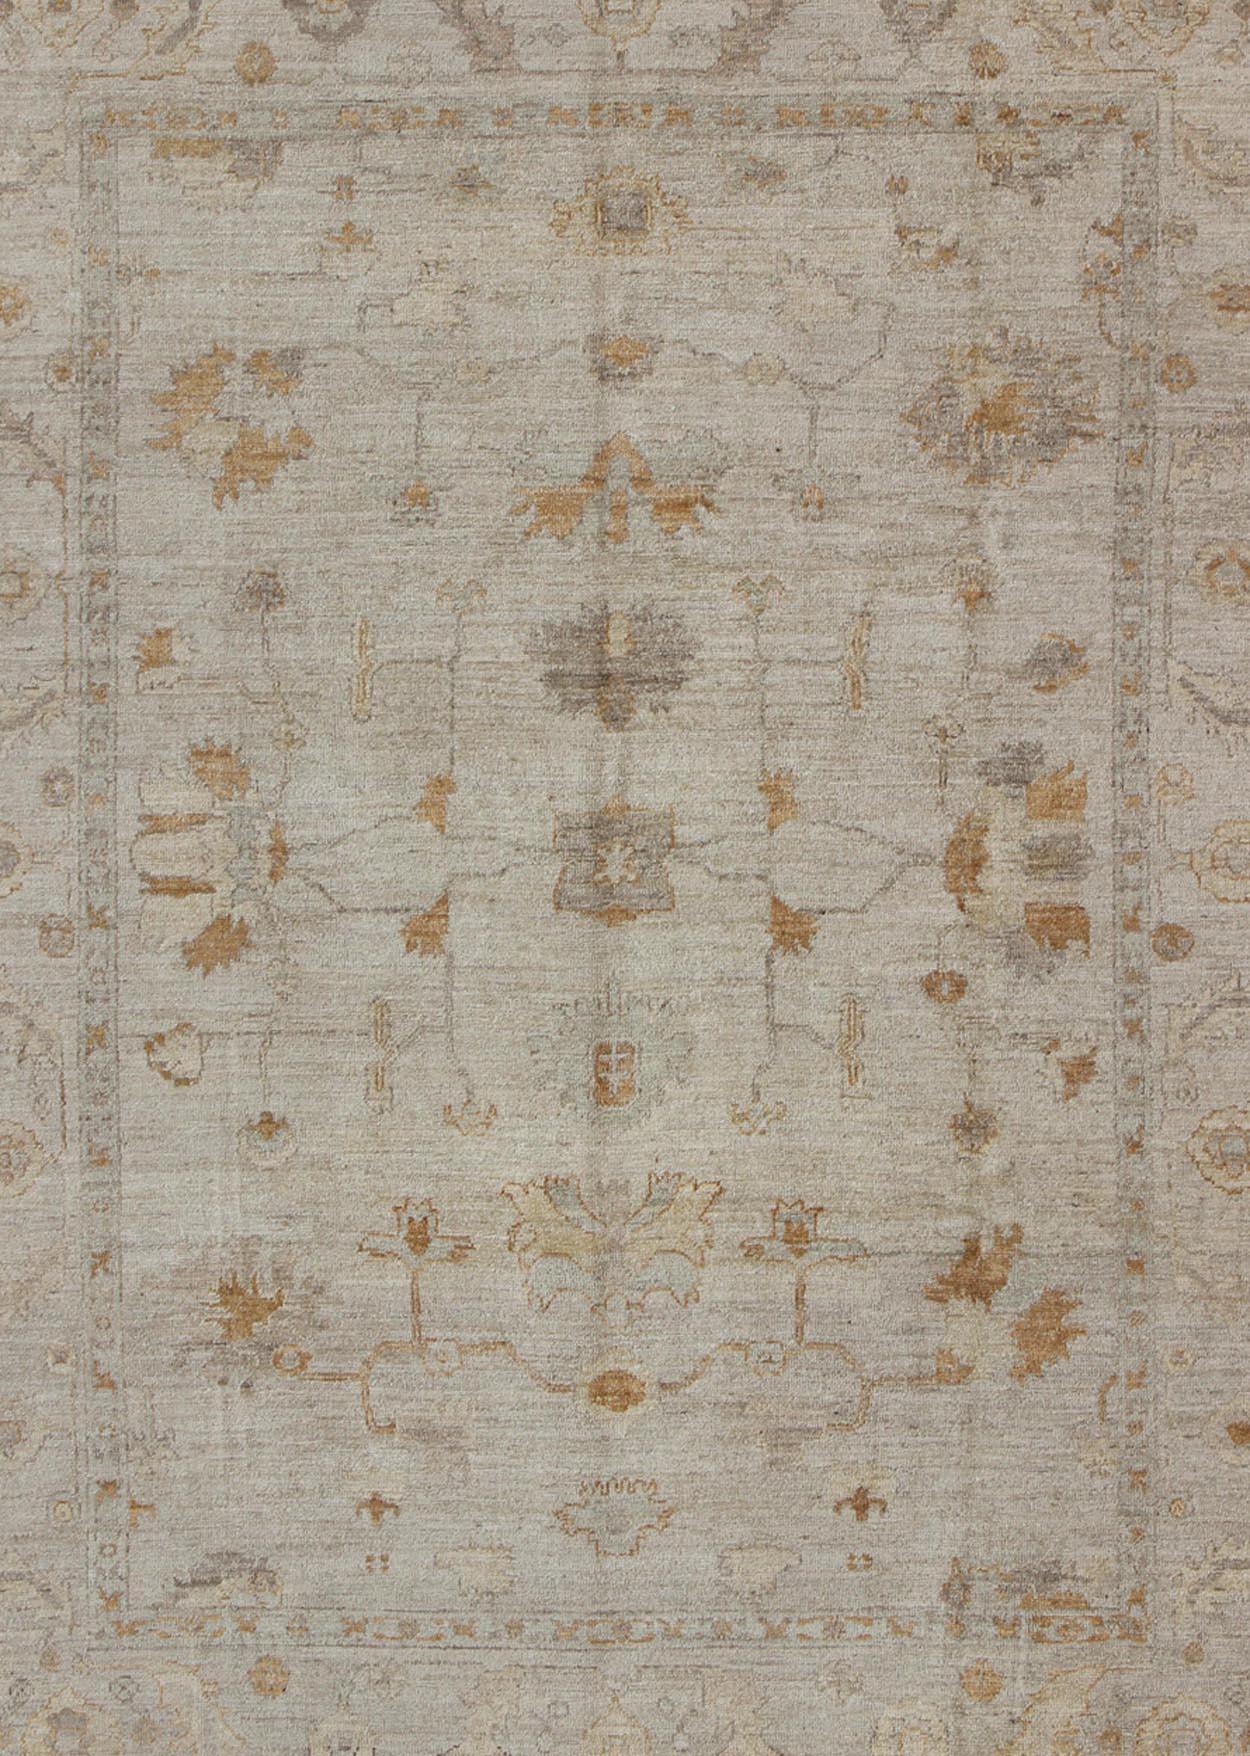 Amazing Angora Turkish Classic Oushak Rug with Floral Motifs in Neutral Tones In Excellent Condition For Sale In Atlanta, GA